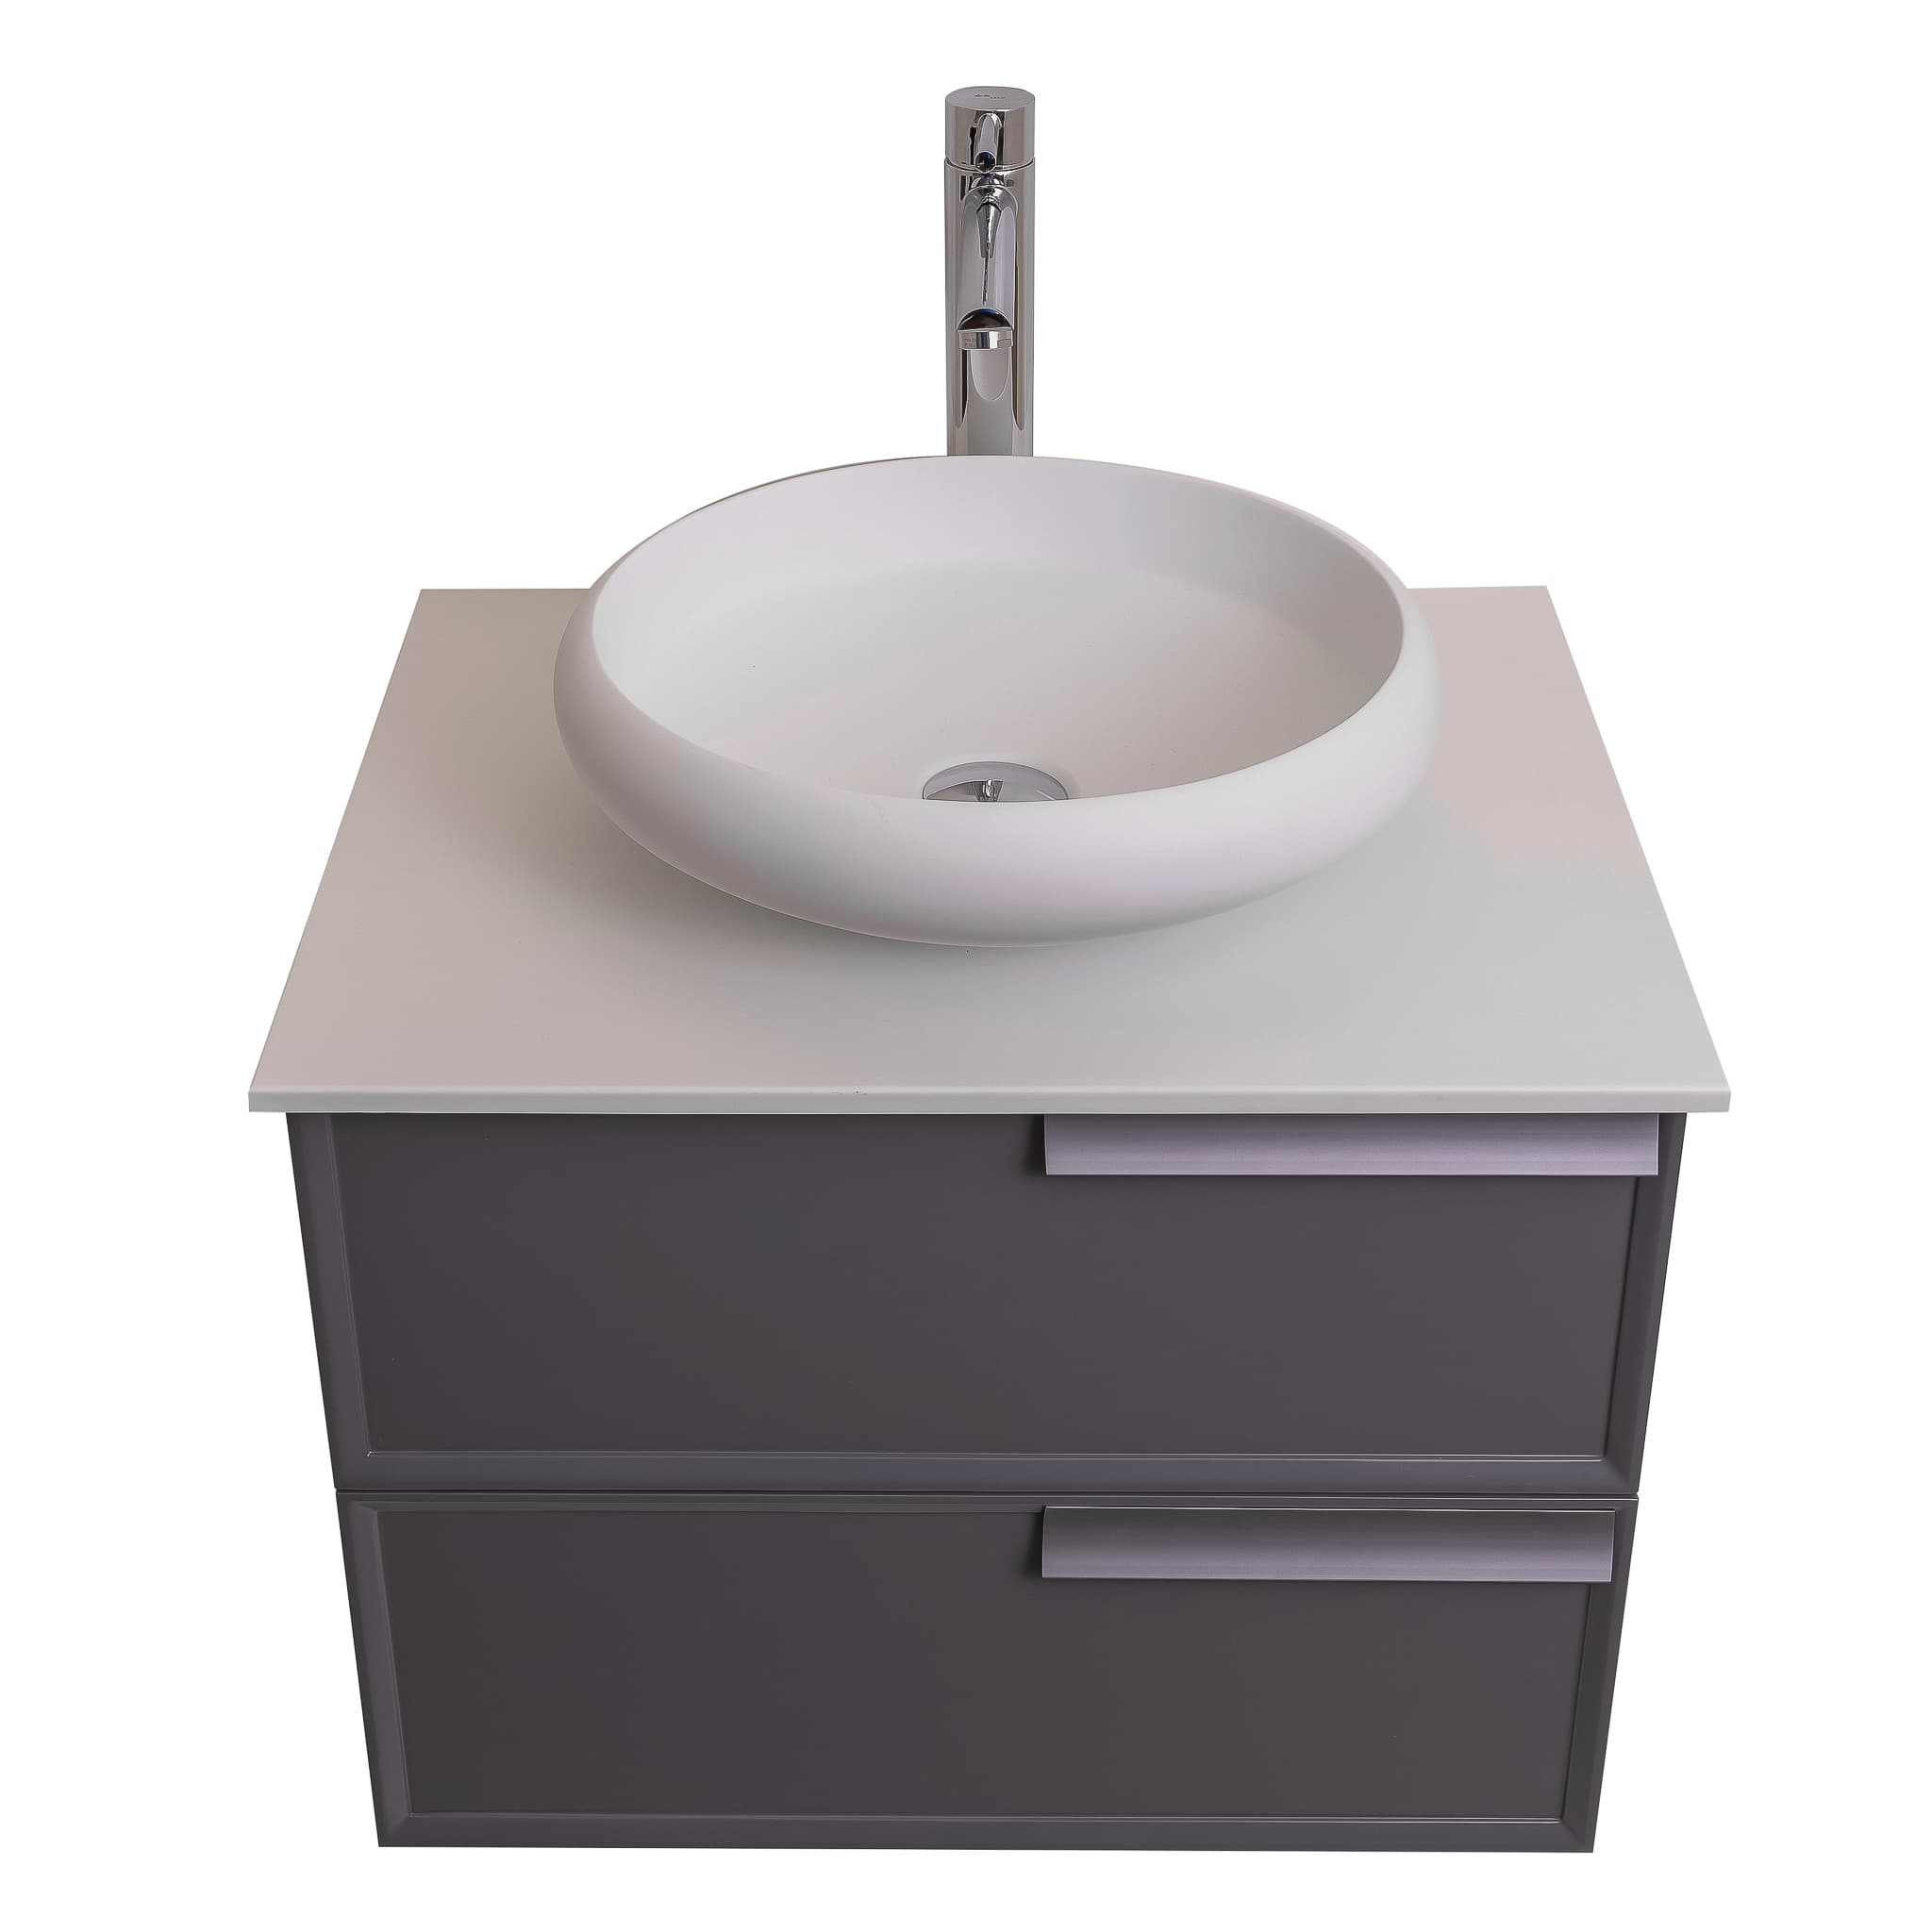 Garda 23.5 Matte Grey Cabinet, Solid Surface Flat White Counter and Round Solid Surface White Basin 1153, Wall Mounted Modern Vanity Set